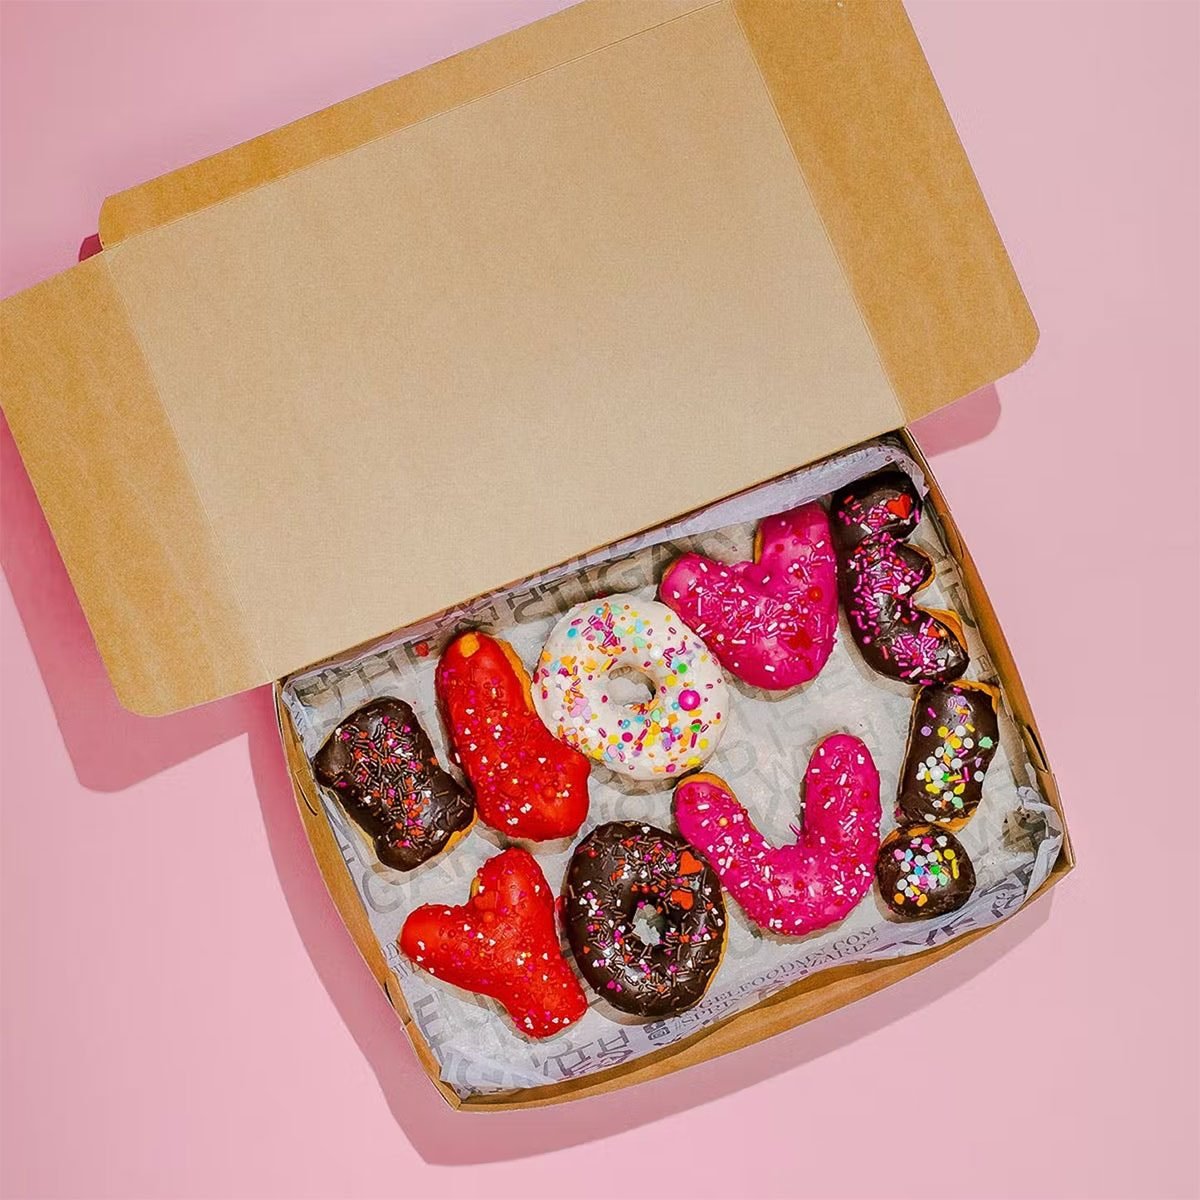 16 Valentine's Day Food Gifts to Ship, valentines day gift